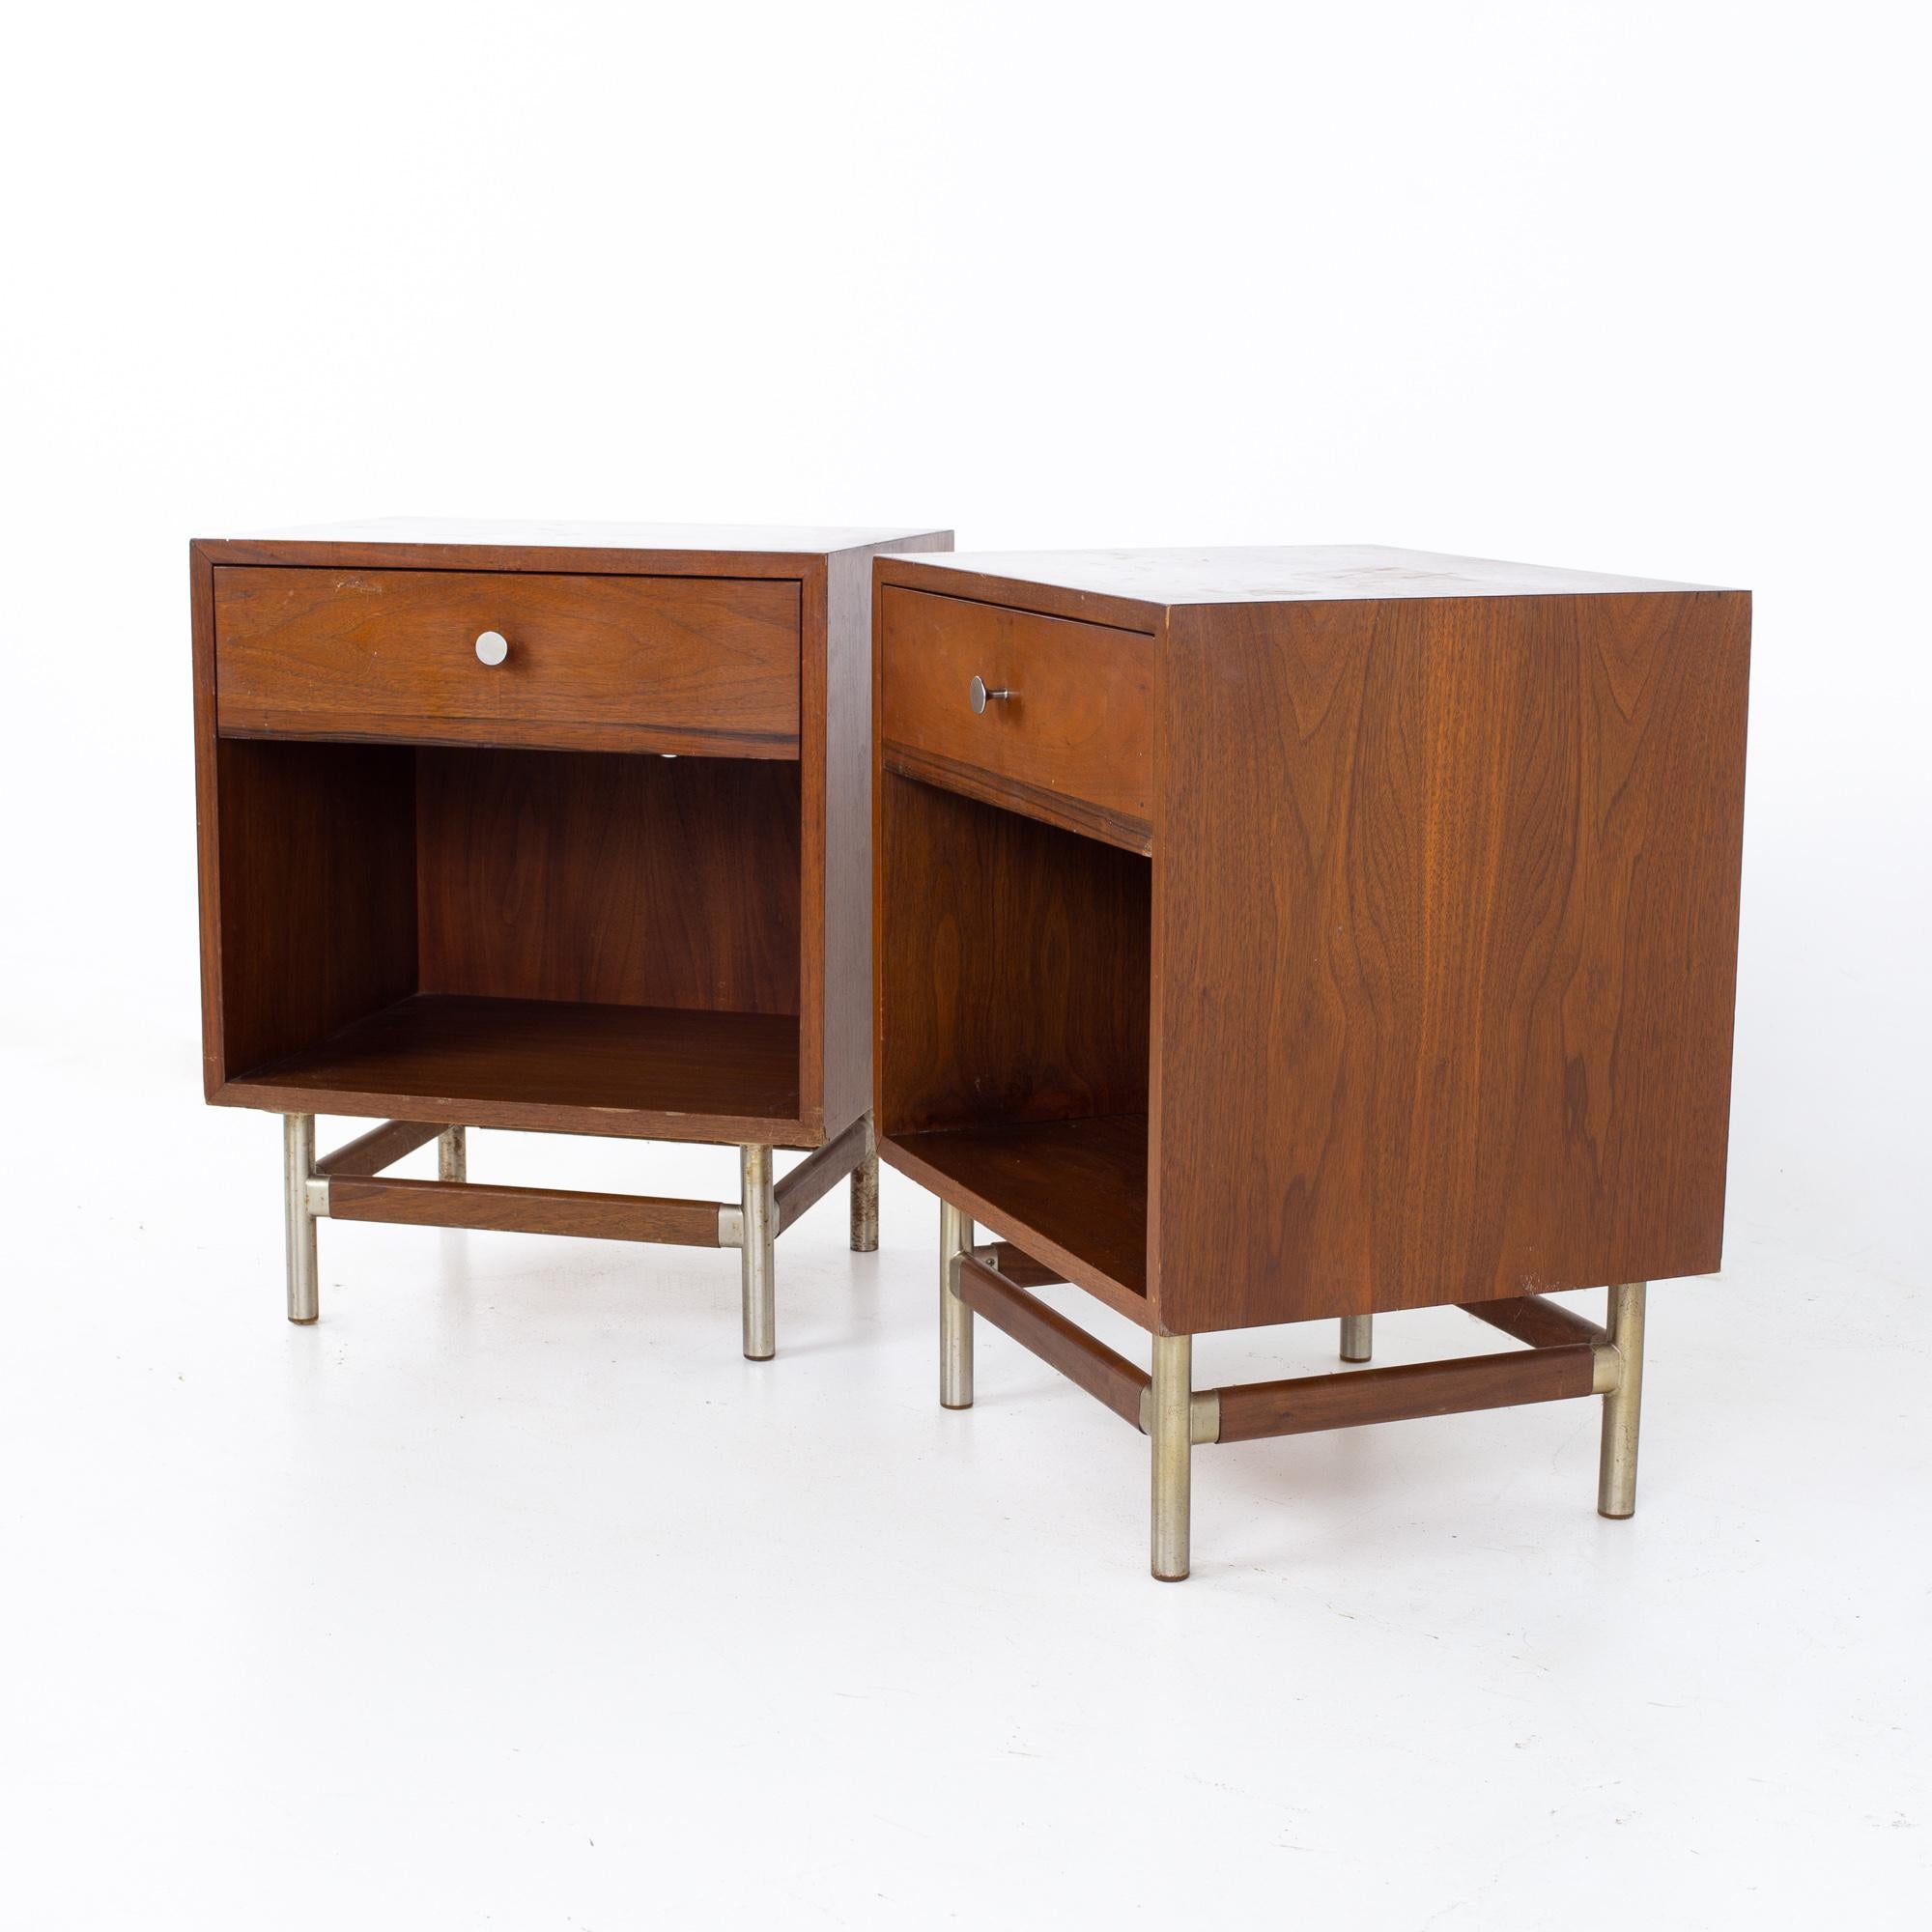 George Nelson style Kroehler signature line mid century walnut, rosewood, and metal nightstands, a pair
Each nightstand measures: 20 wide x 16 deep x 24.75 inches high

All pieces of furniture can be had in what we call restored vintage